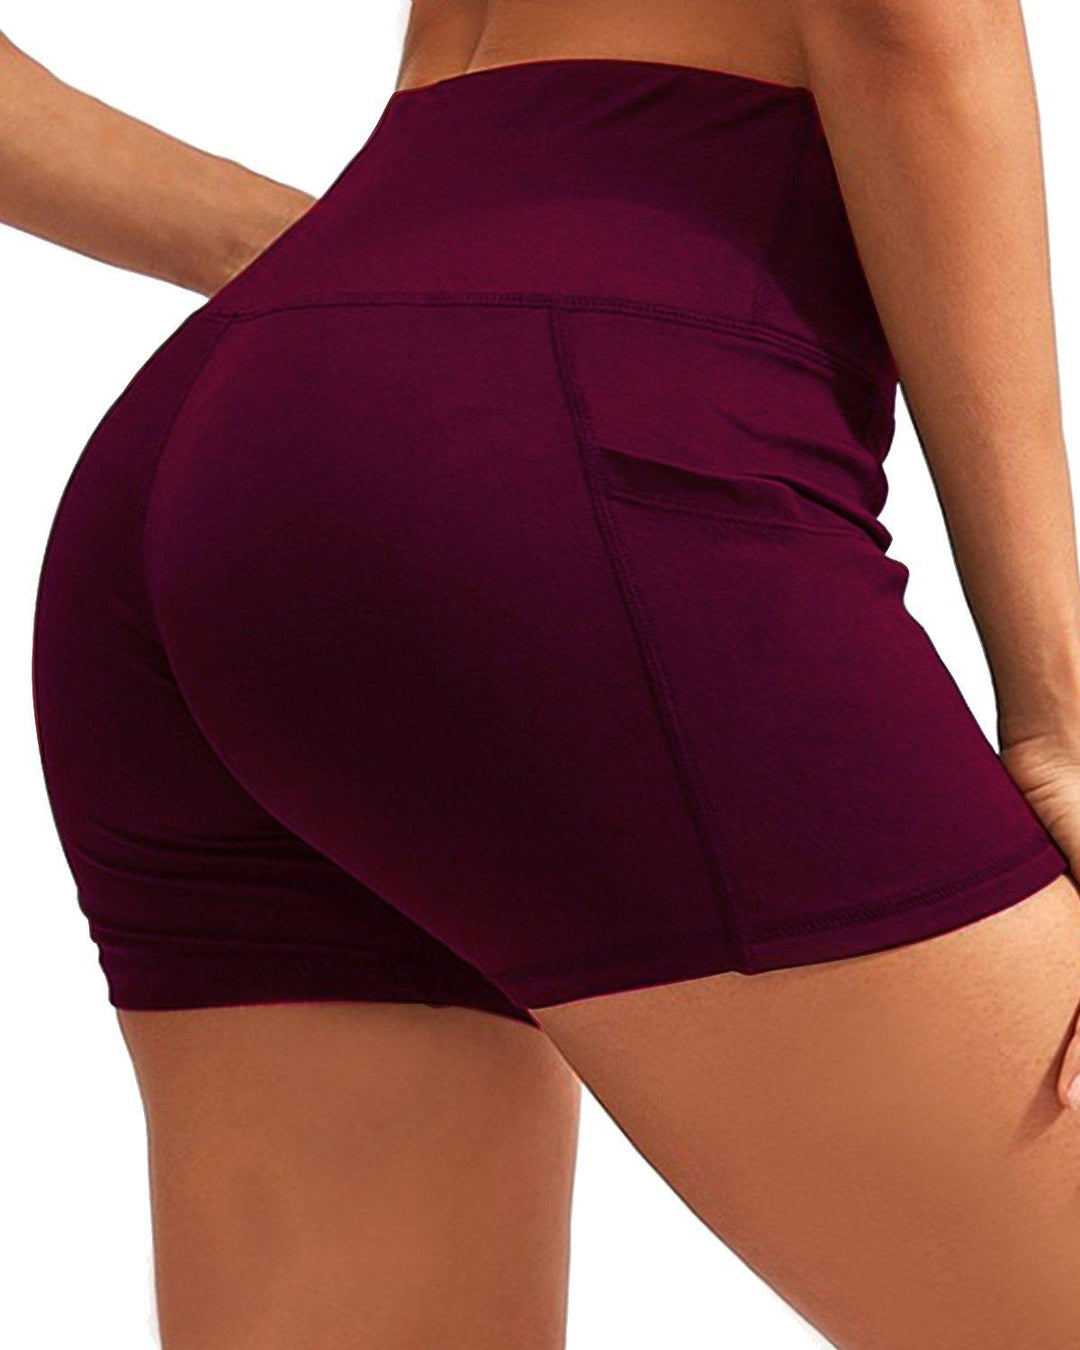 CALCAO HIGH WAIST YOGA SHORTS WITH POCKET - RED - Brand My Case